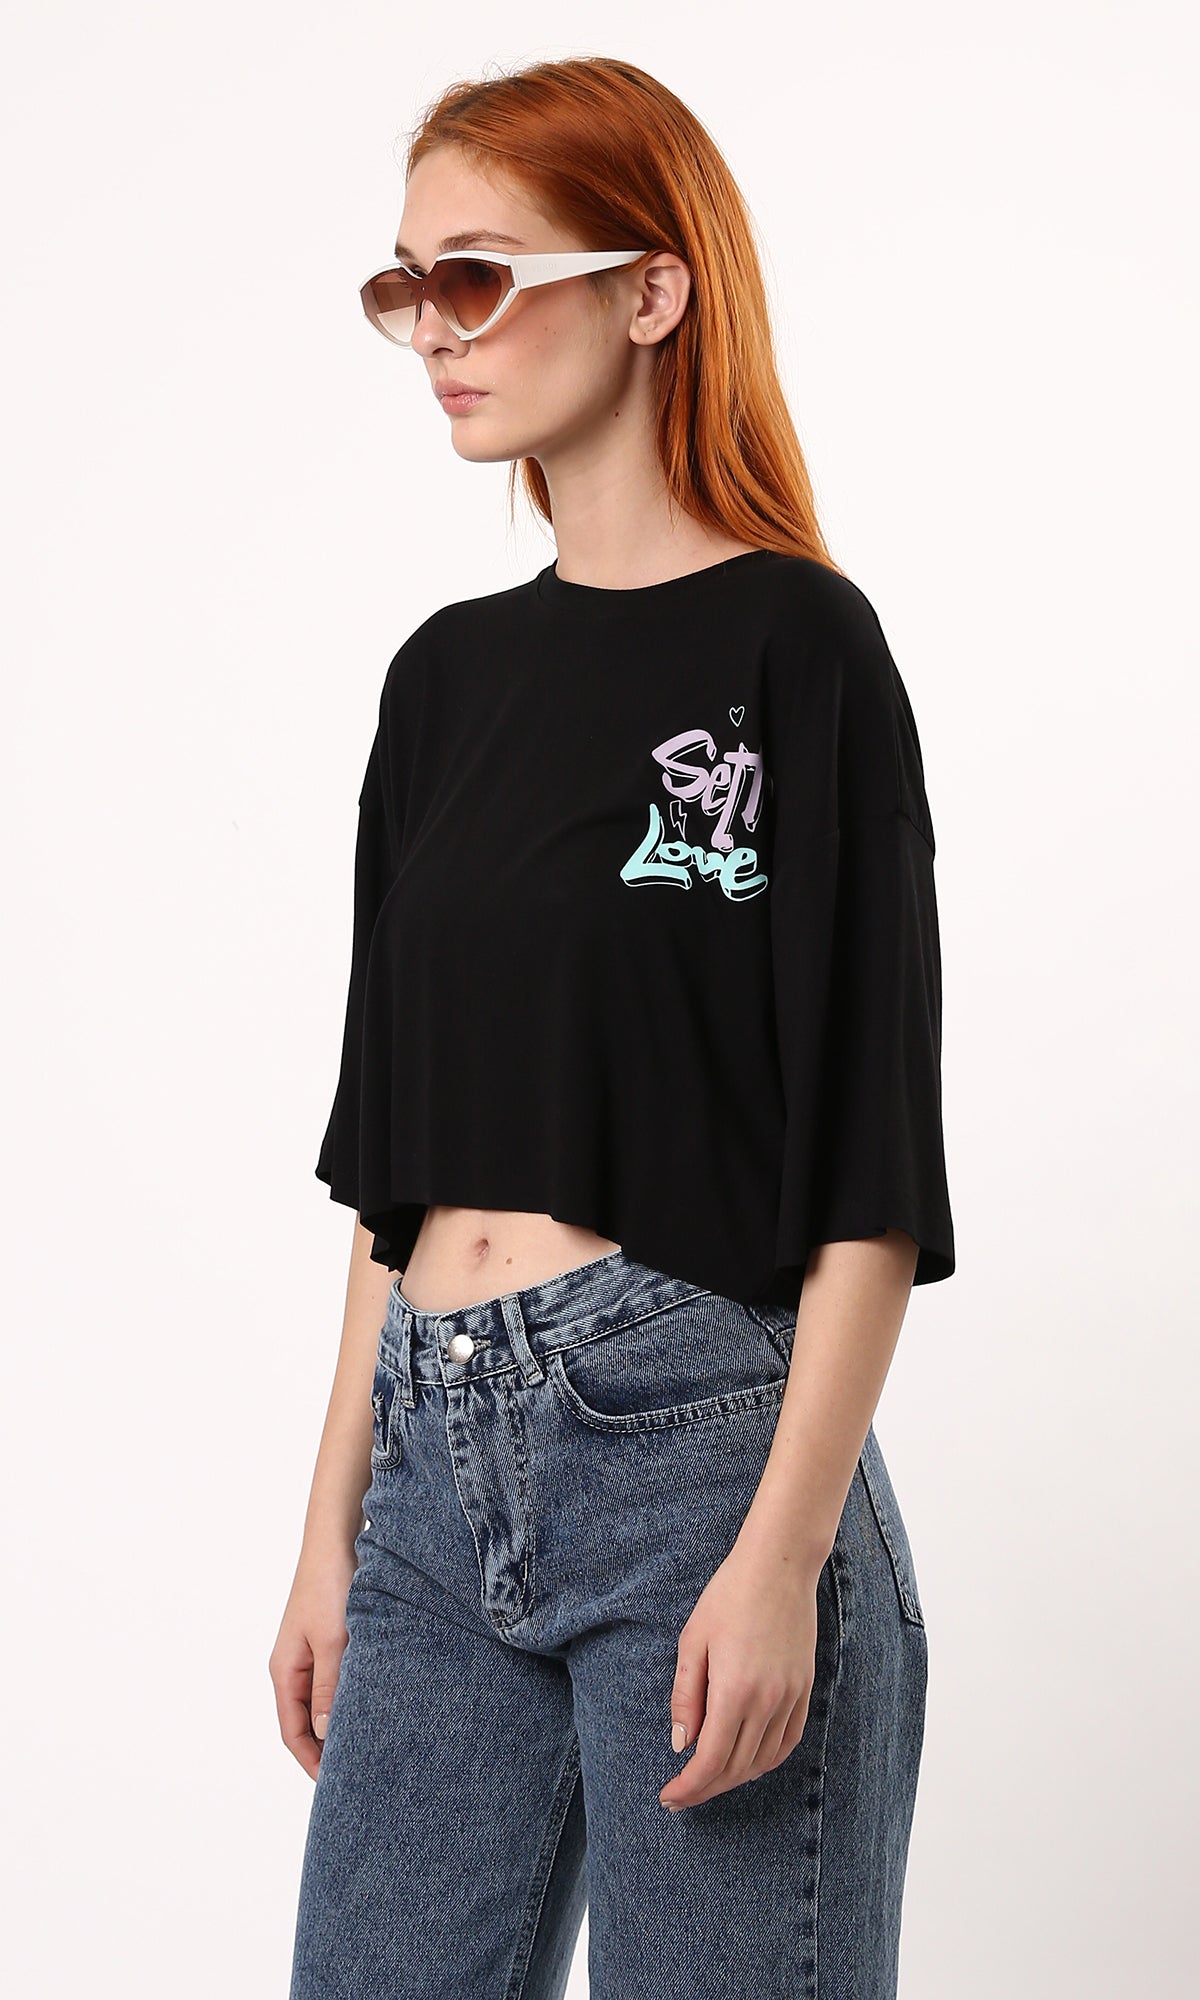 O183083 Fluffy Black Cotton Tee With "Self Love" Print